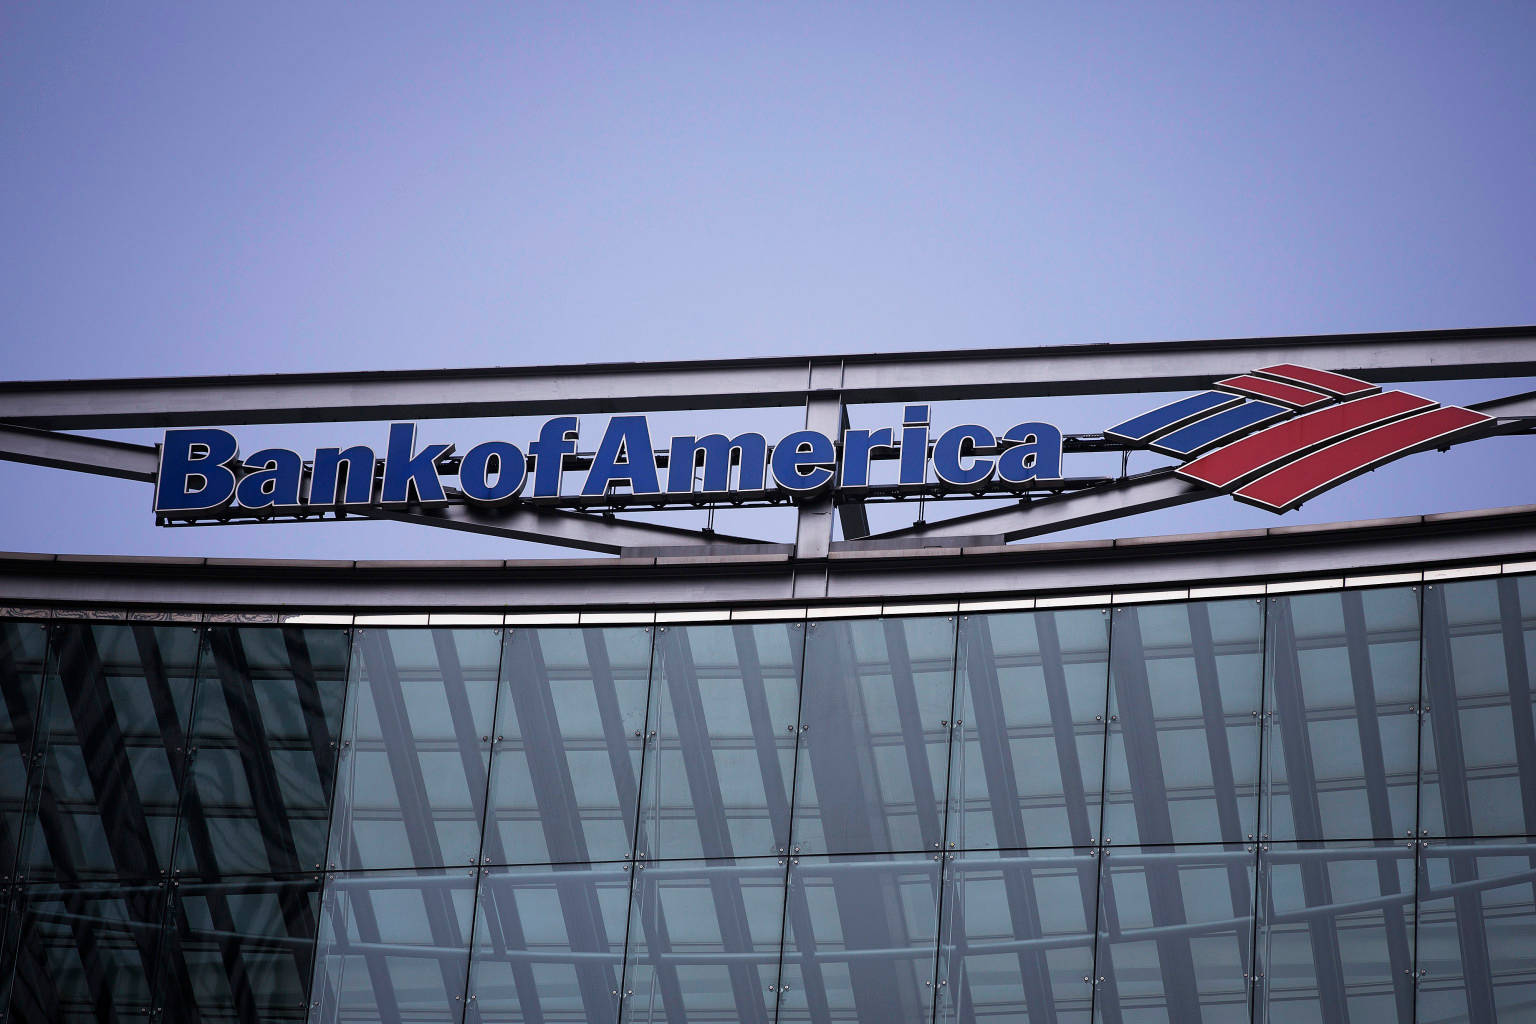 Bank Of America Roof Lettering Signage Background